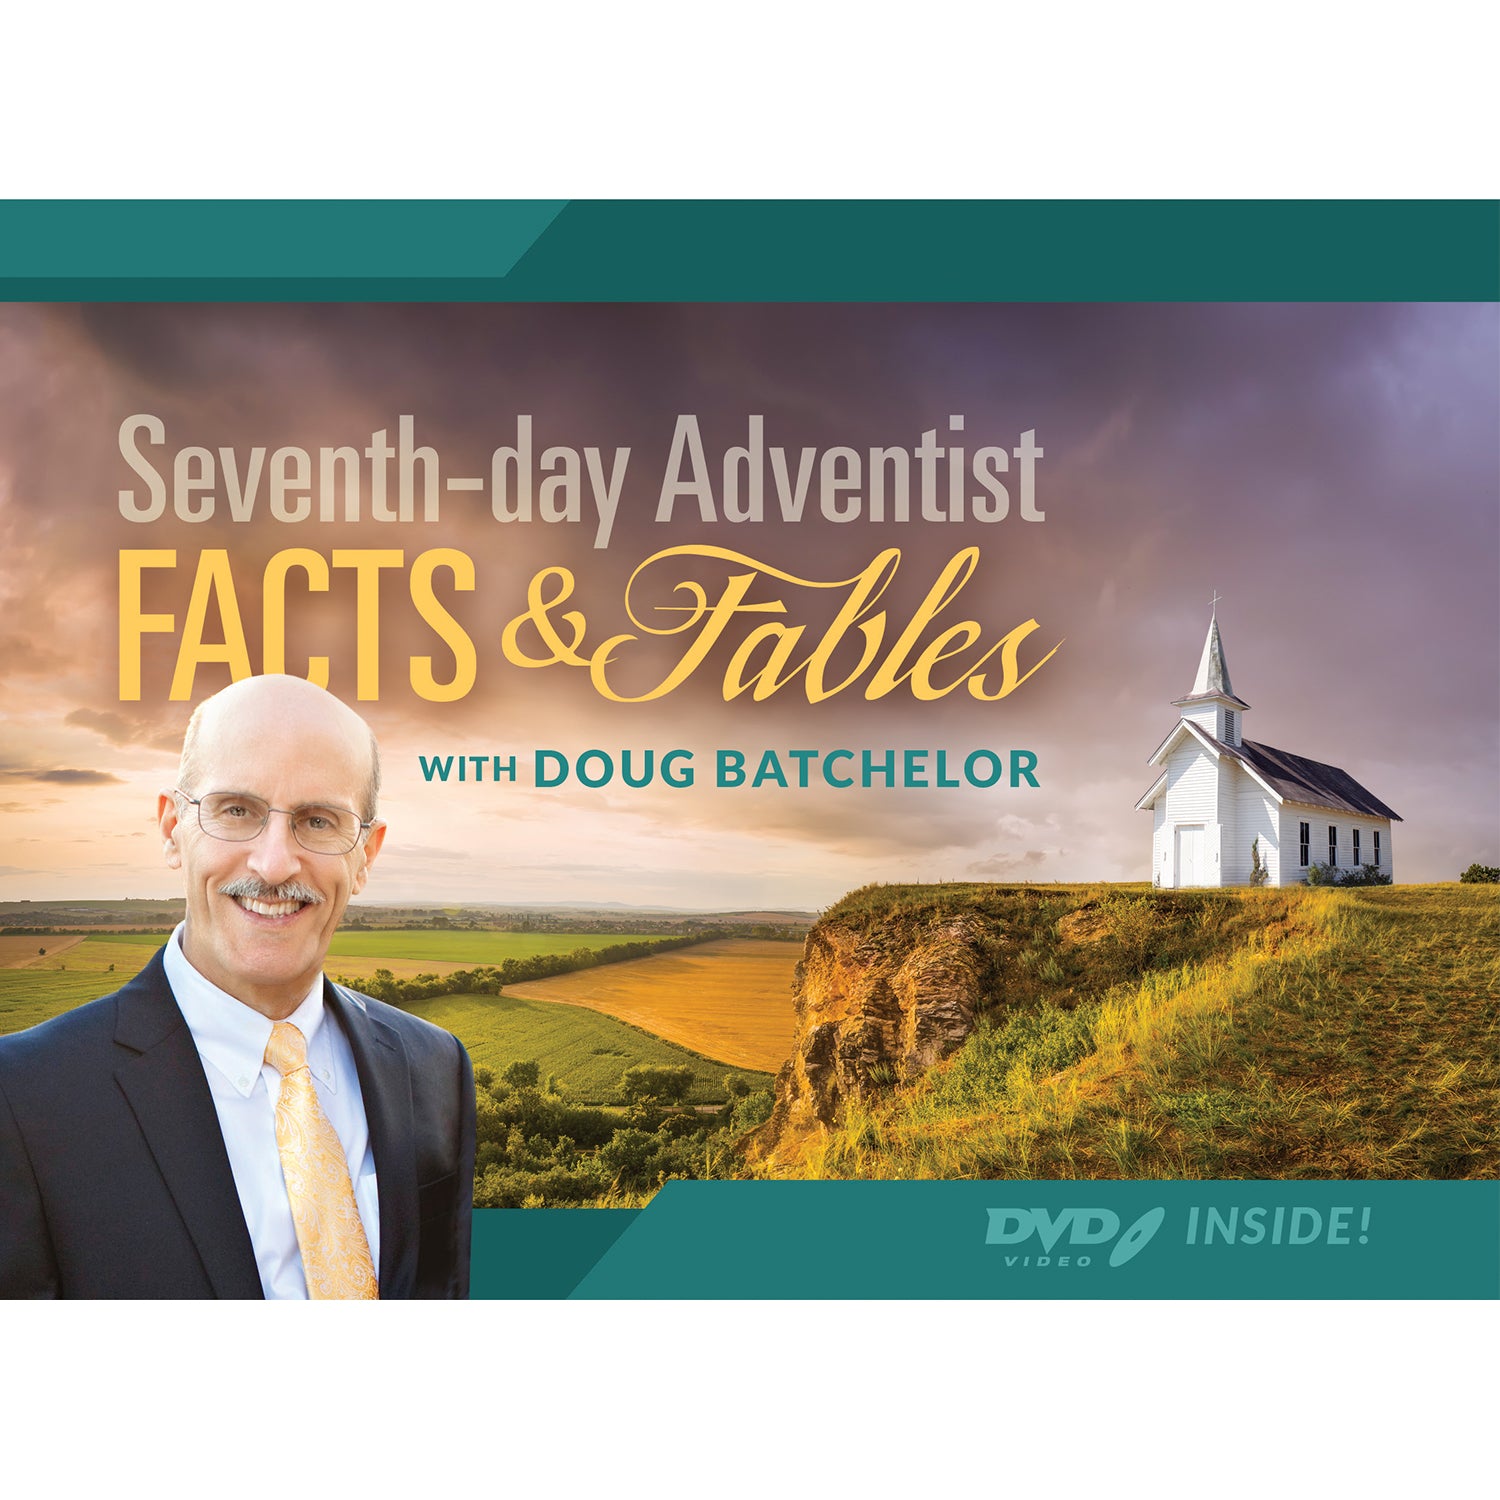 Seventh-day Adventist: Facts & Fables by Doug Batchelor